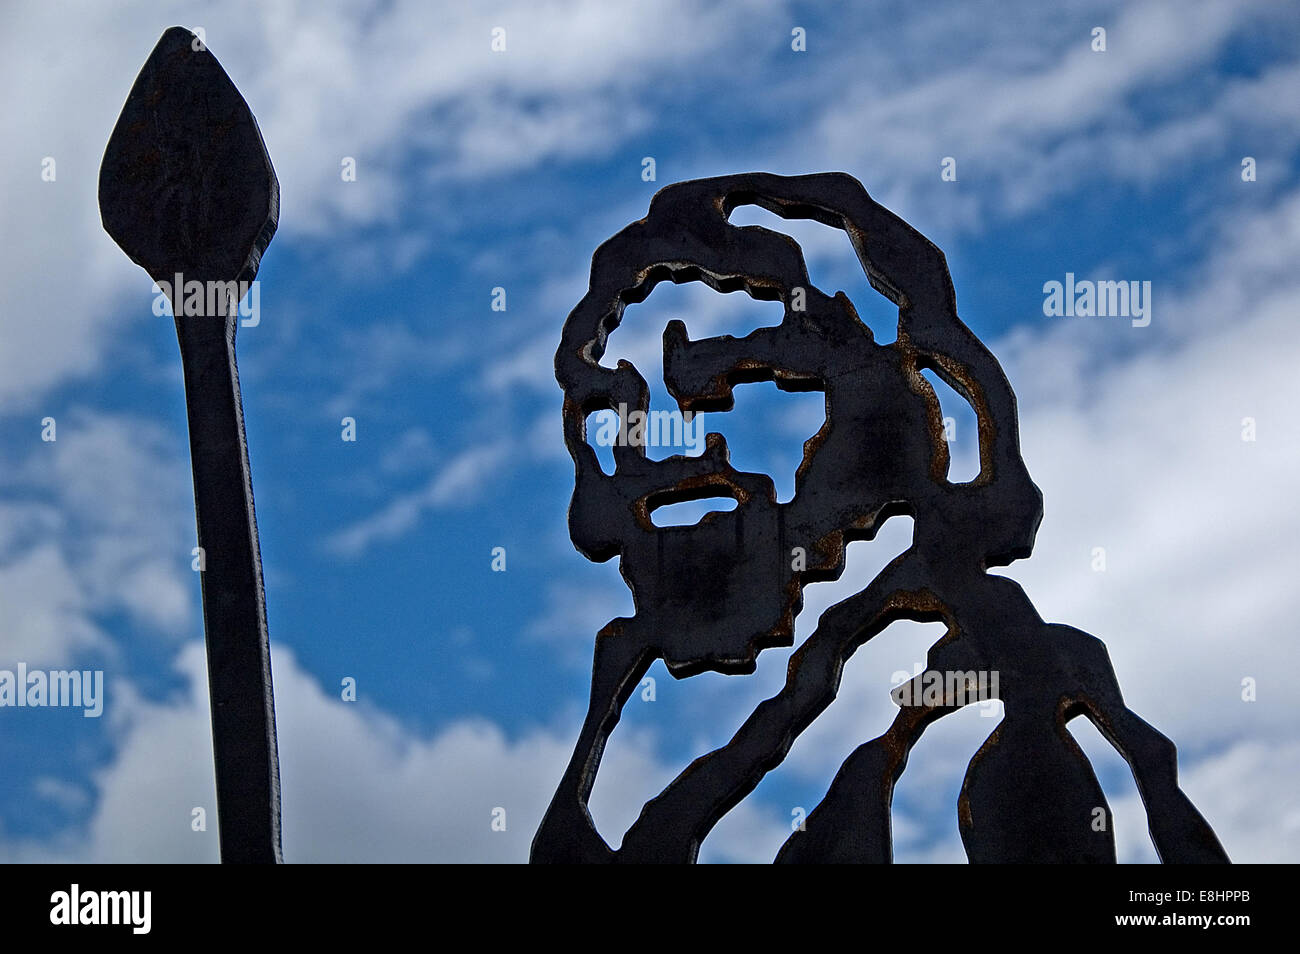 Statue of figures cut out from corten steel to create striking silhouette likenesses of people and animals. Stock Photo